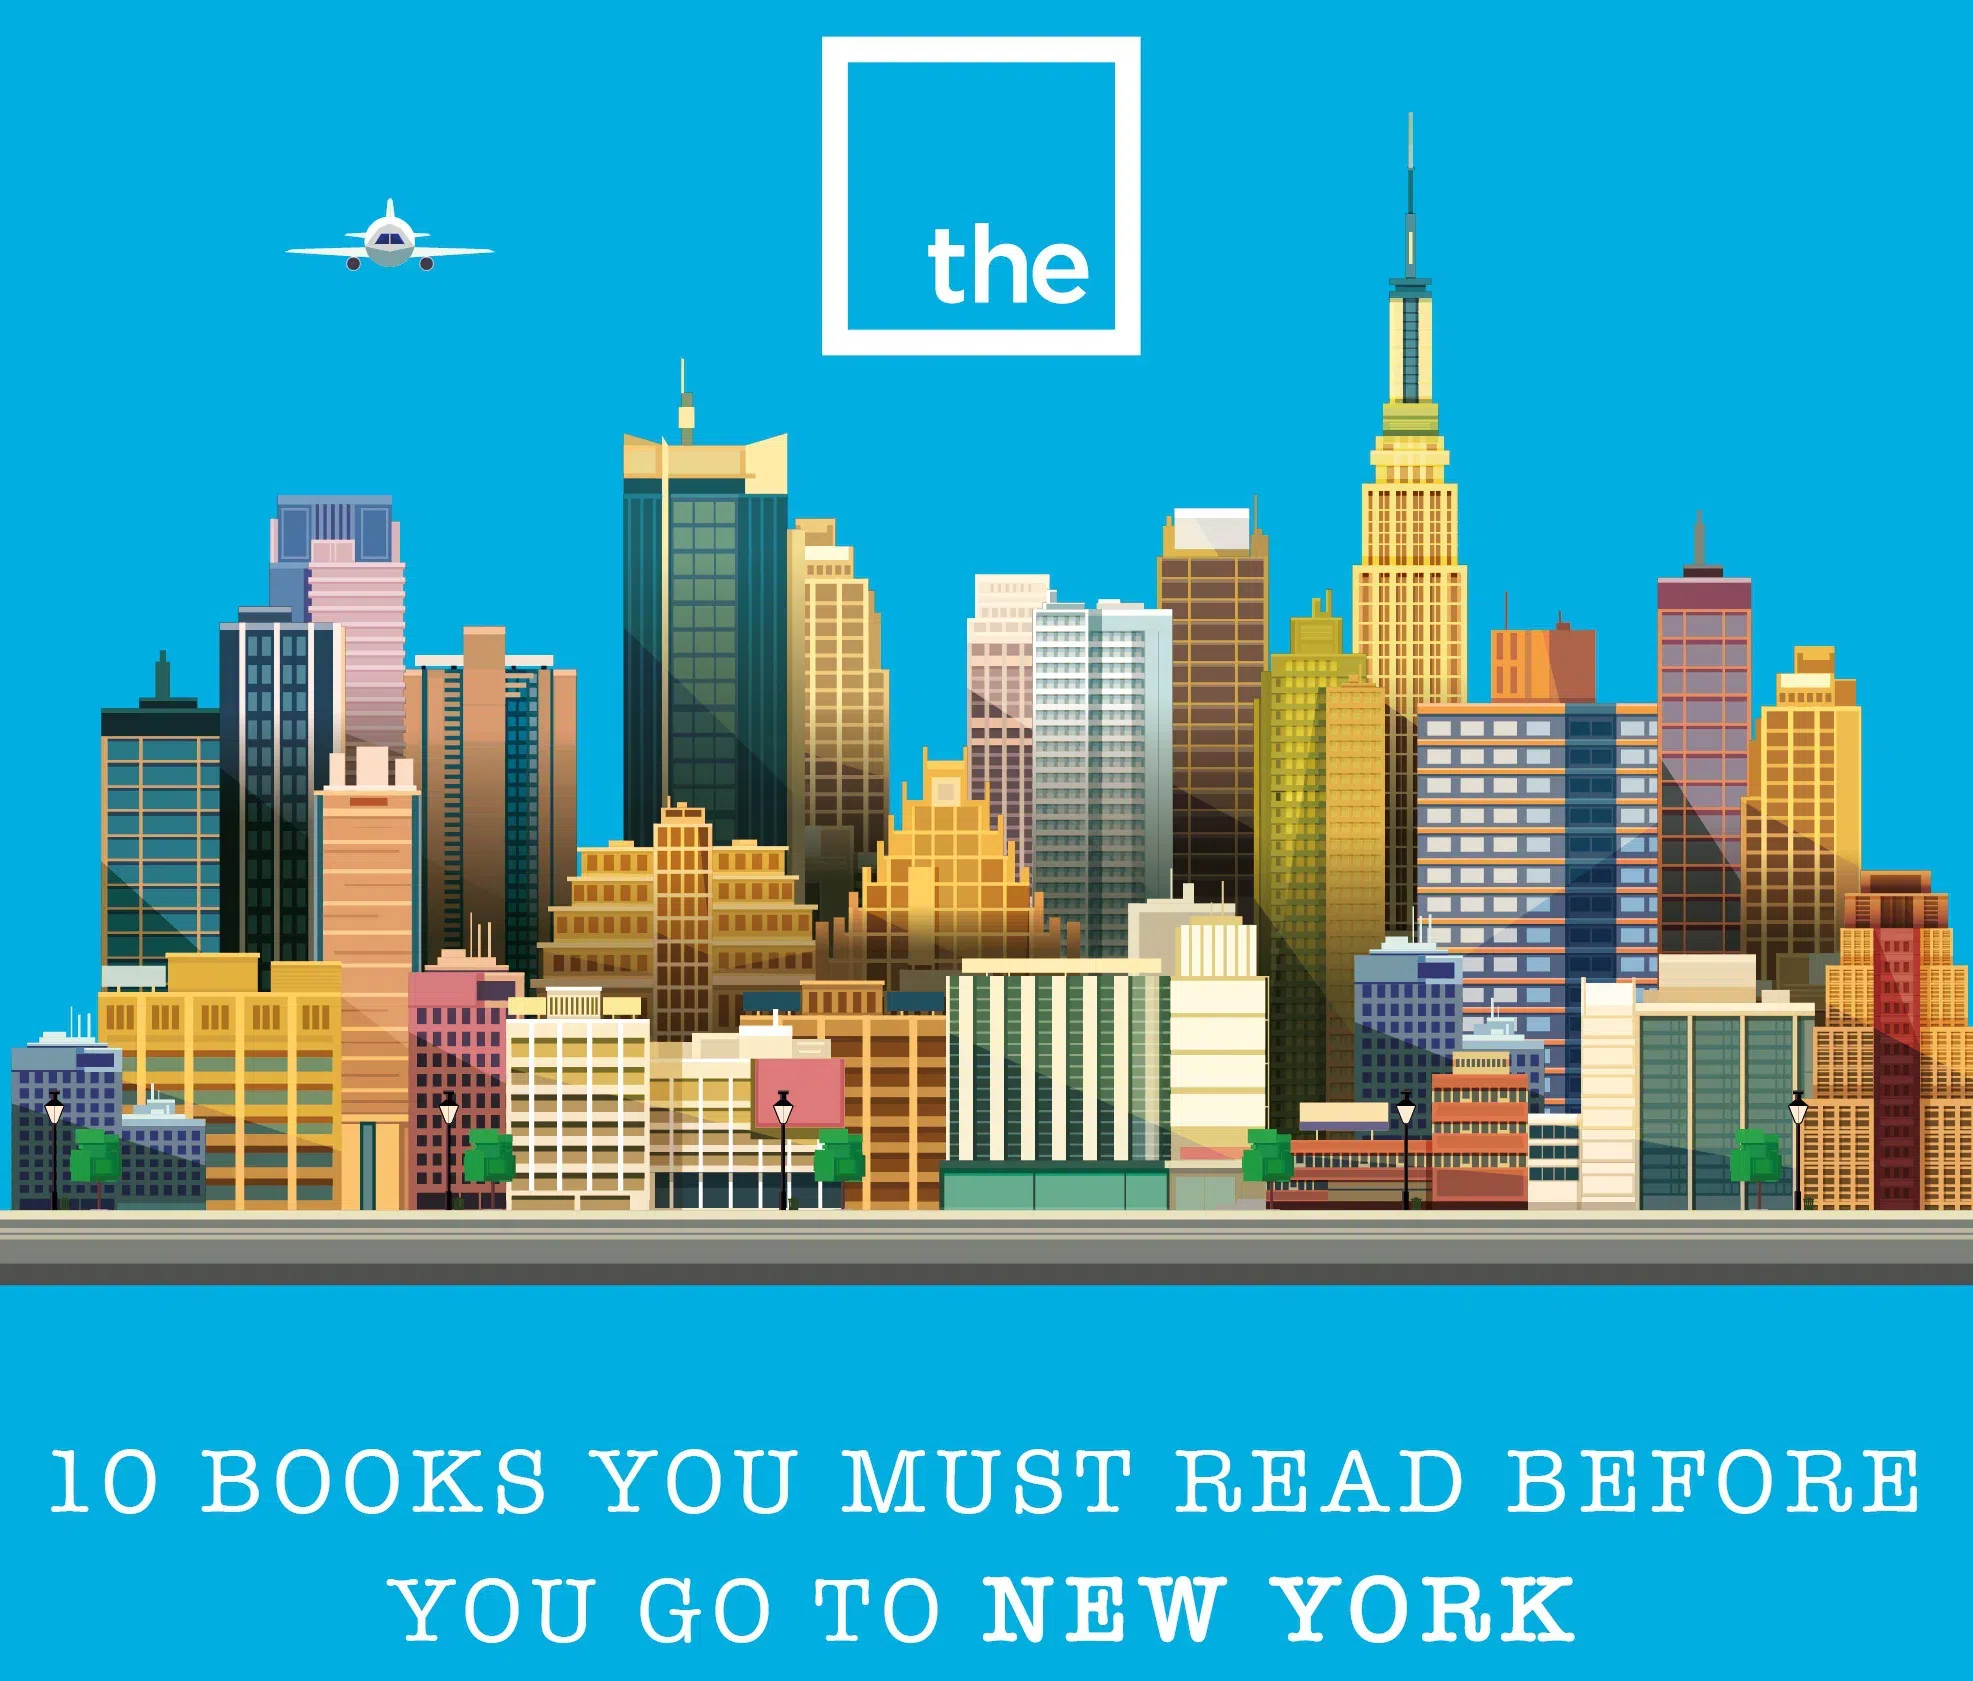 10 Books You Must Read Before You Go to New York